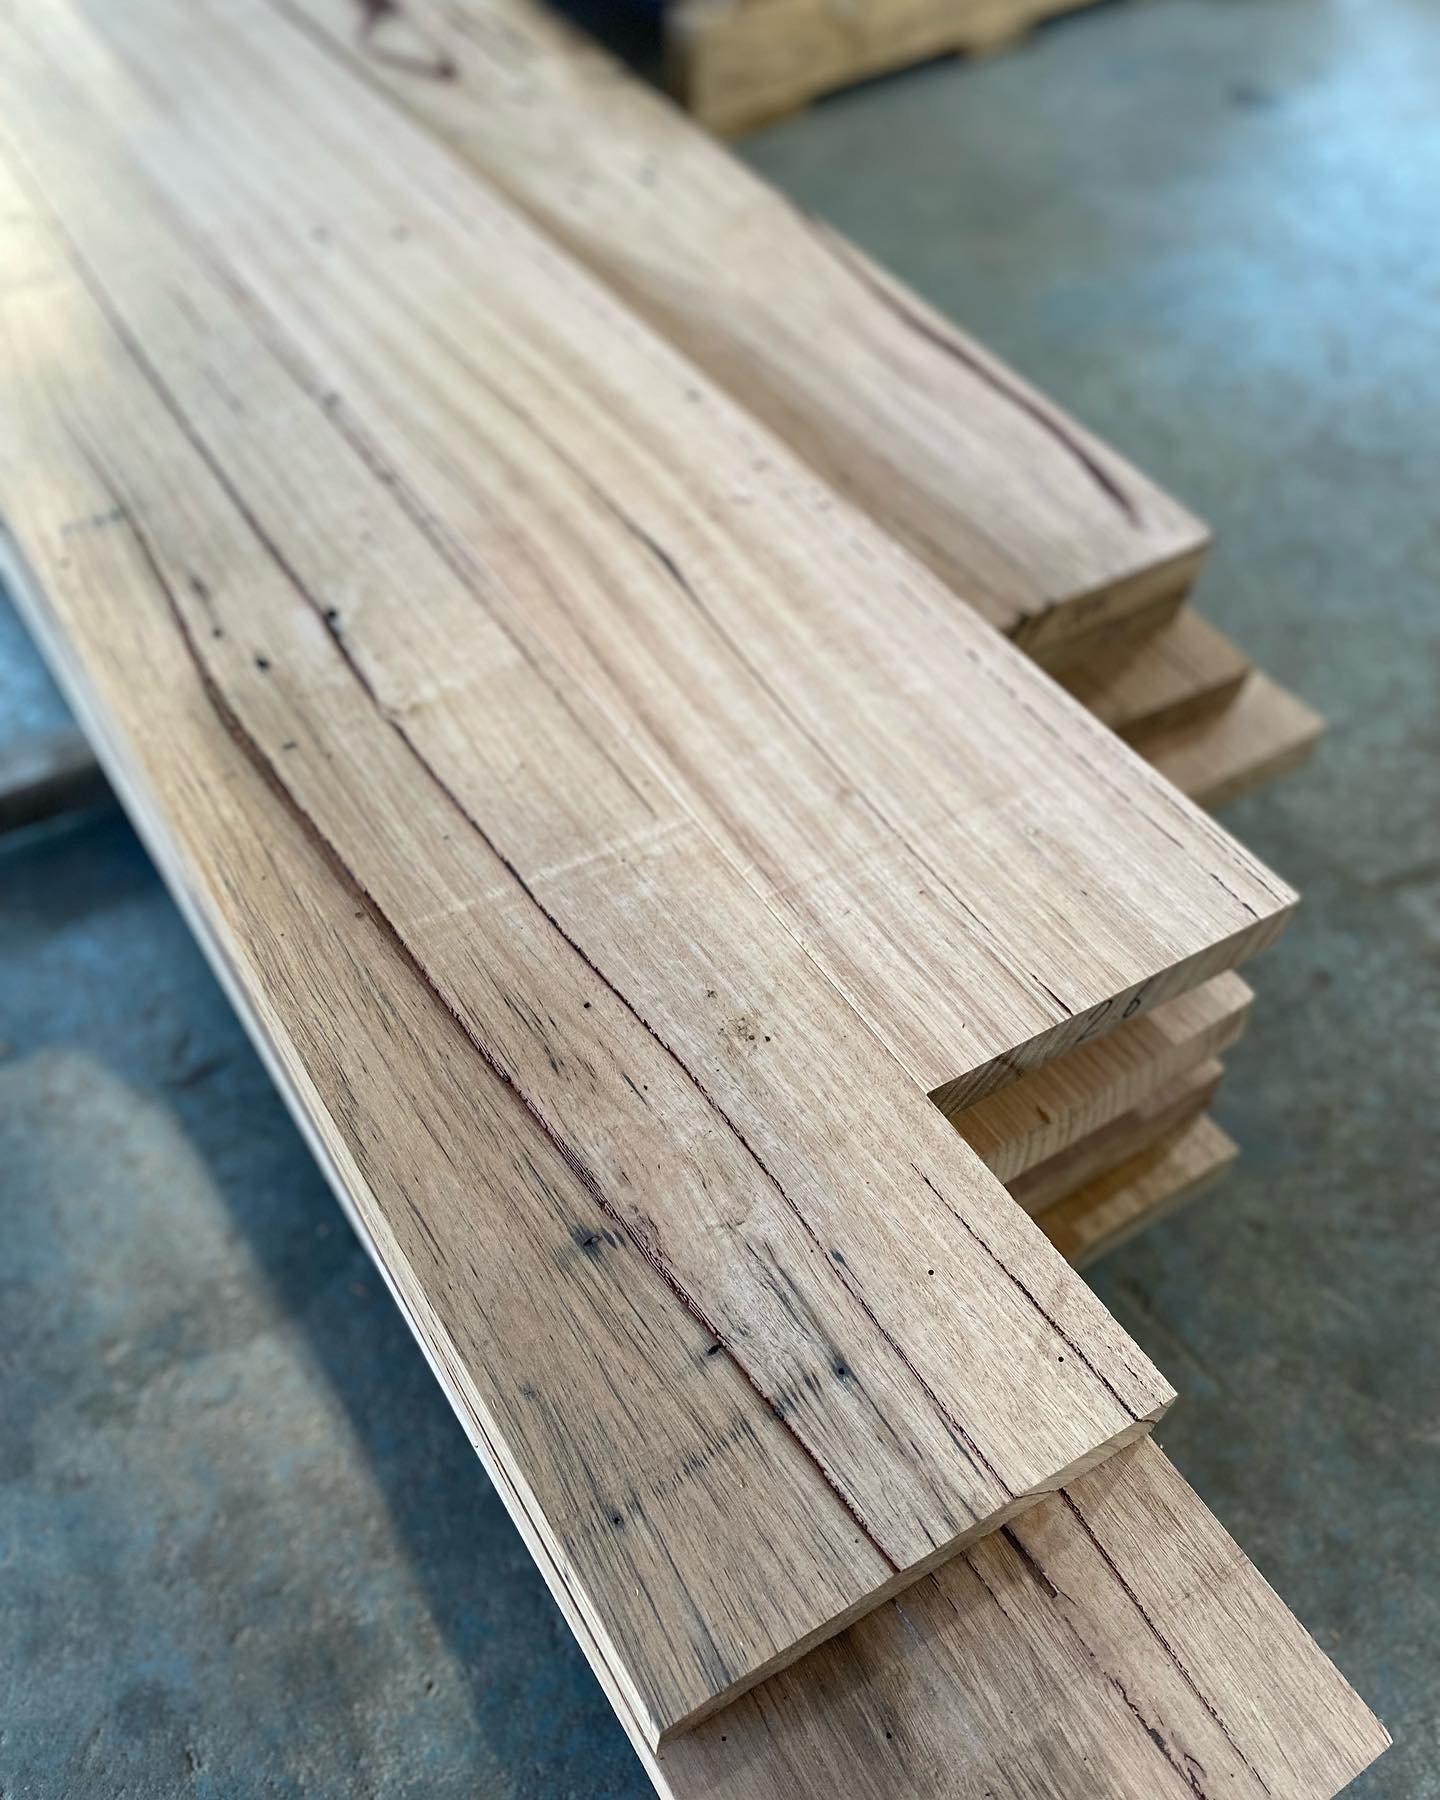 170x30 recycled Messmate, Blackbutt and Ash fresh off the press. Mon-Fri 8 - 4. Get in quick! 👍🌳⚒️